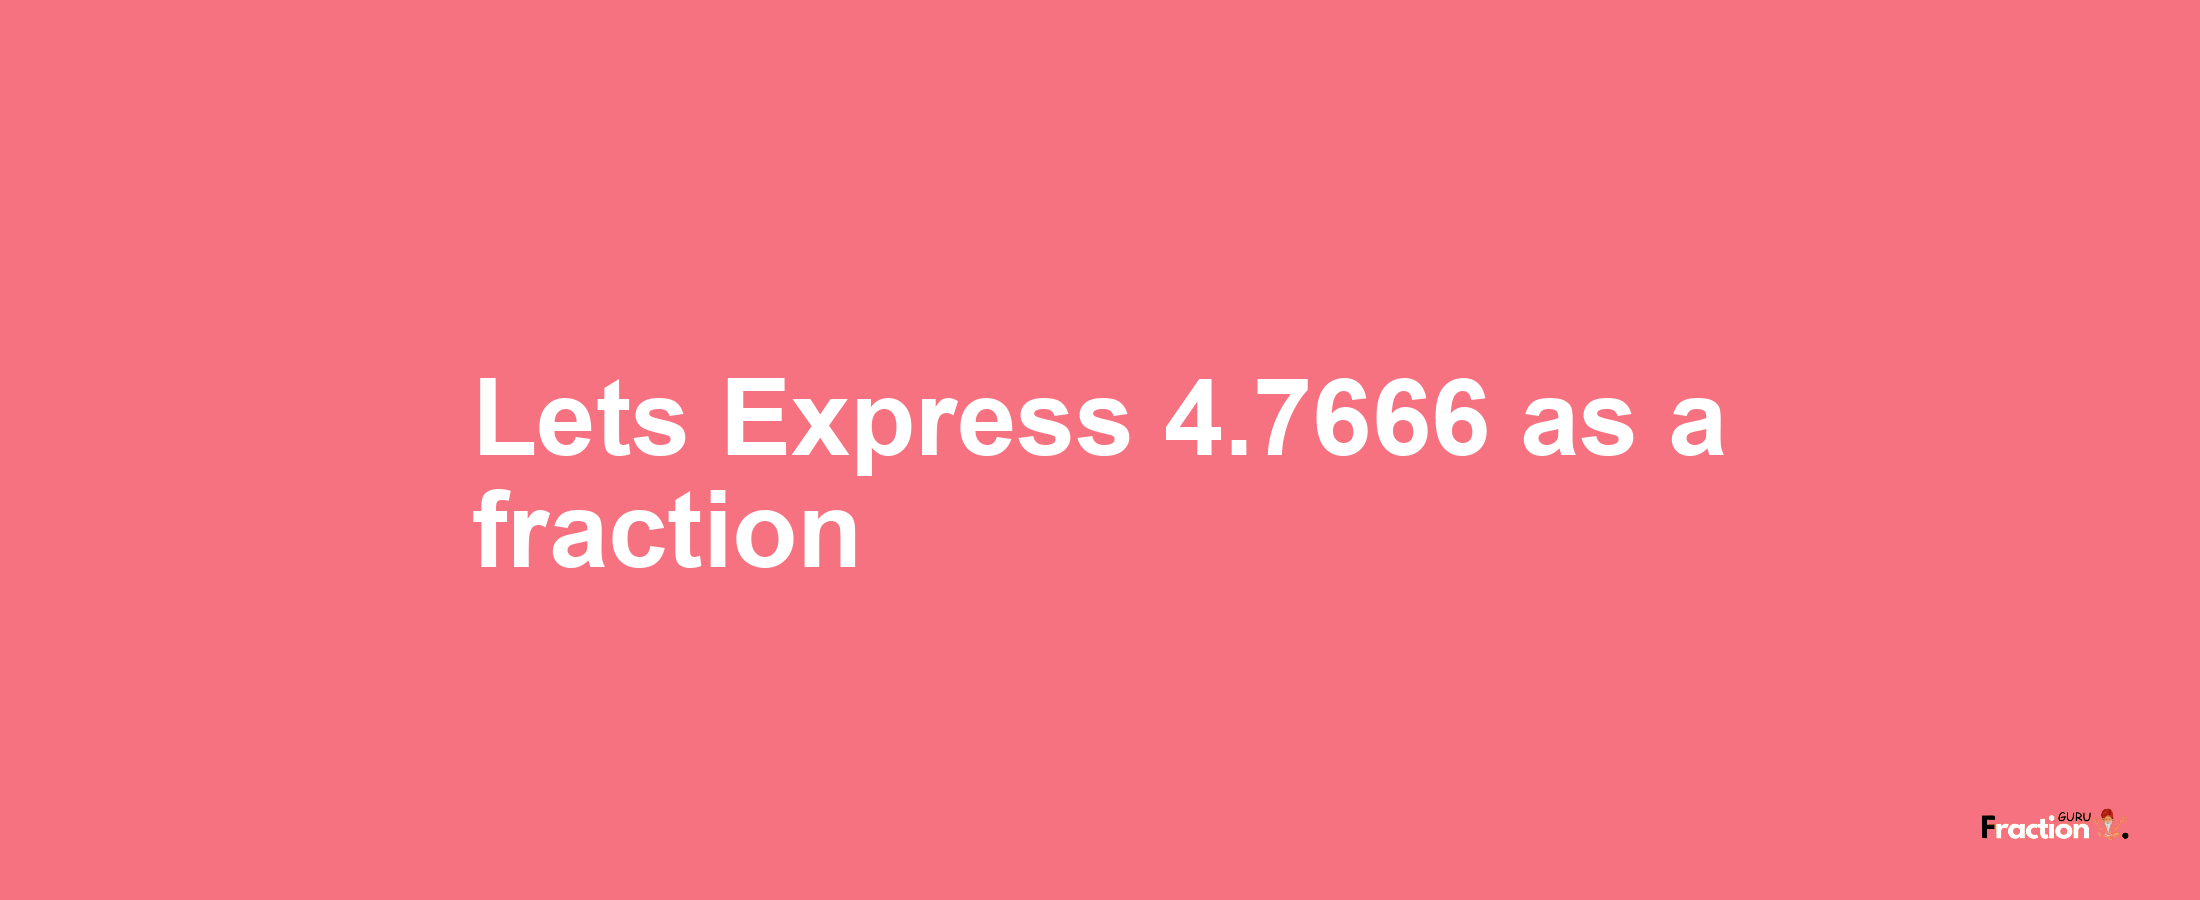 Lets Express 4.7666 as afraction